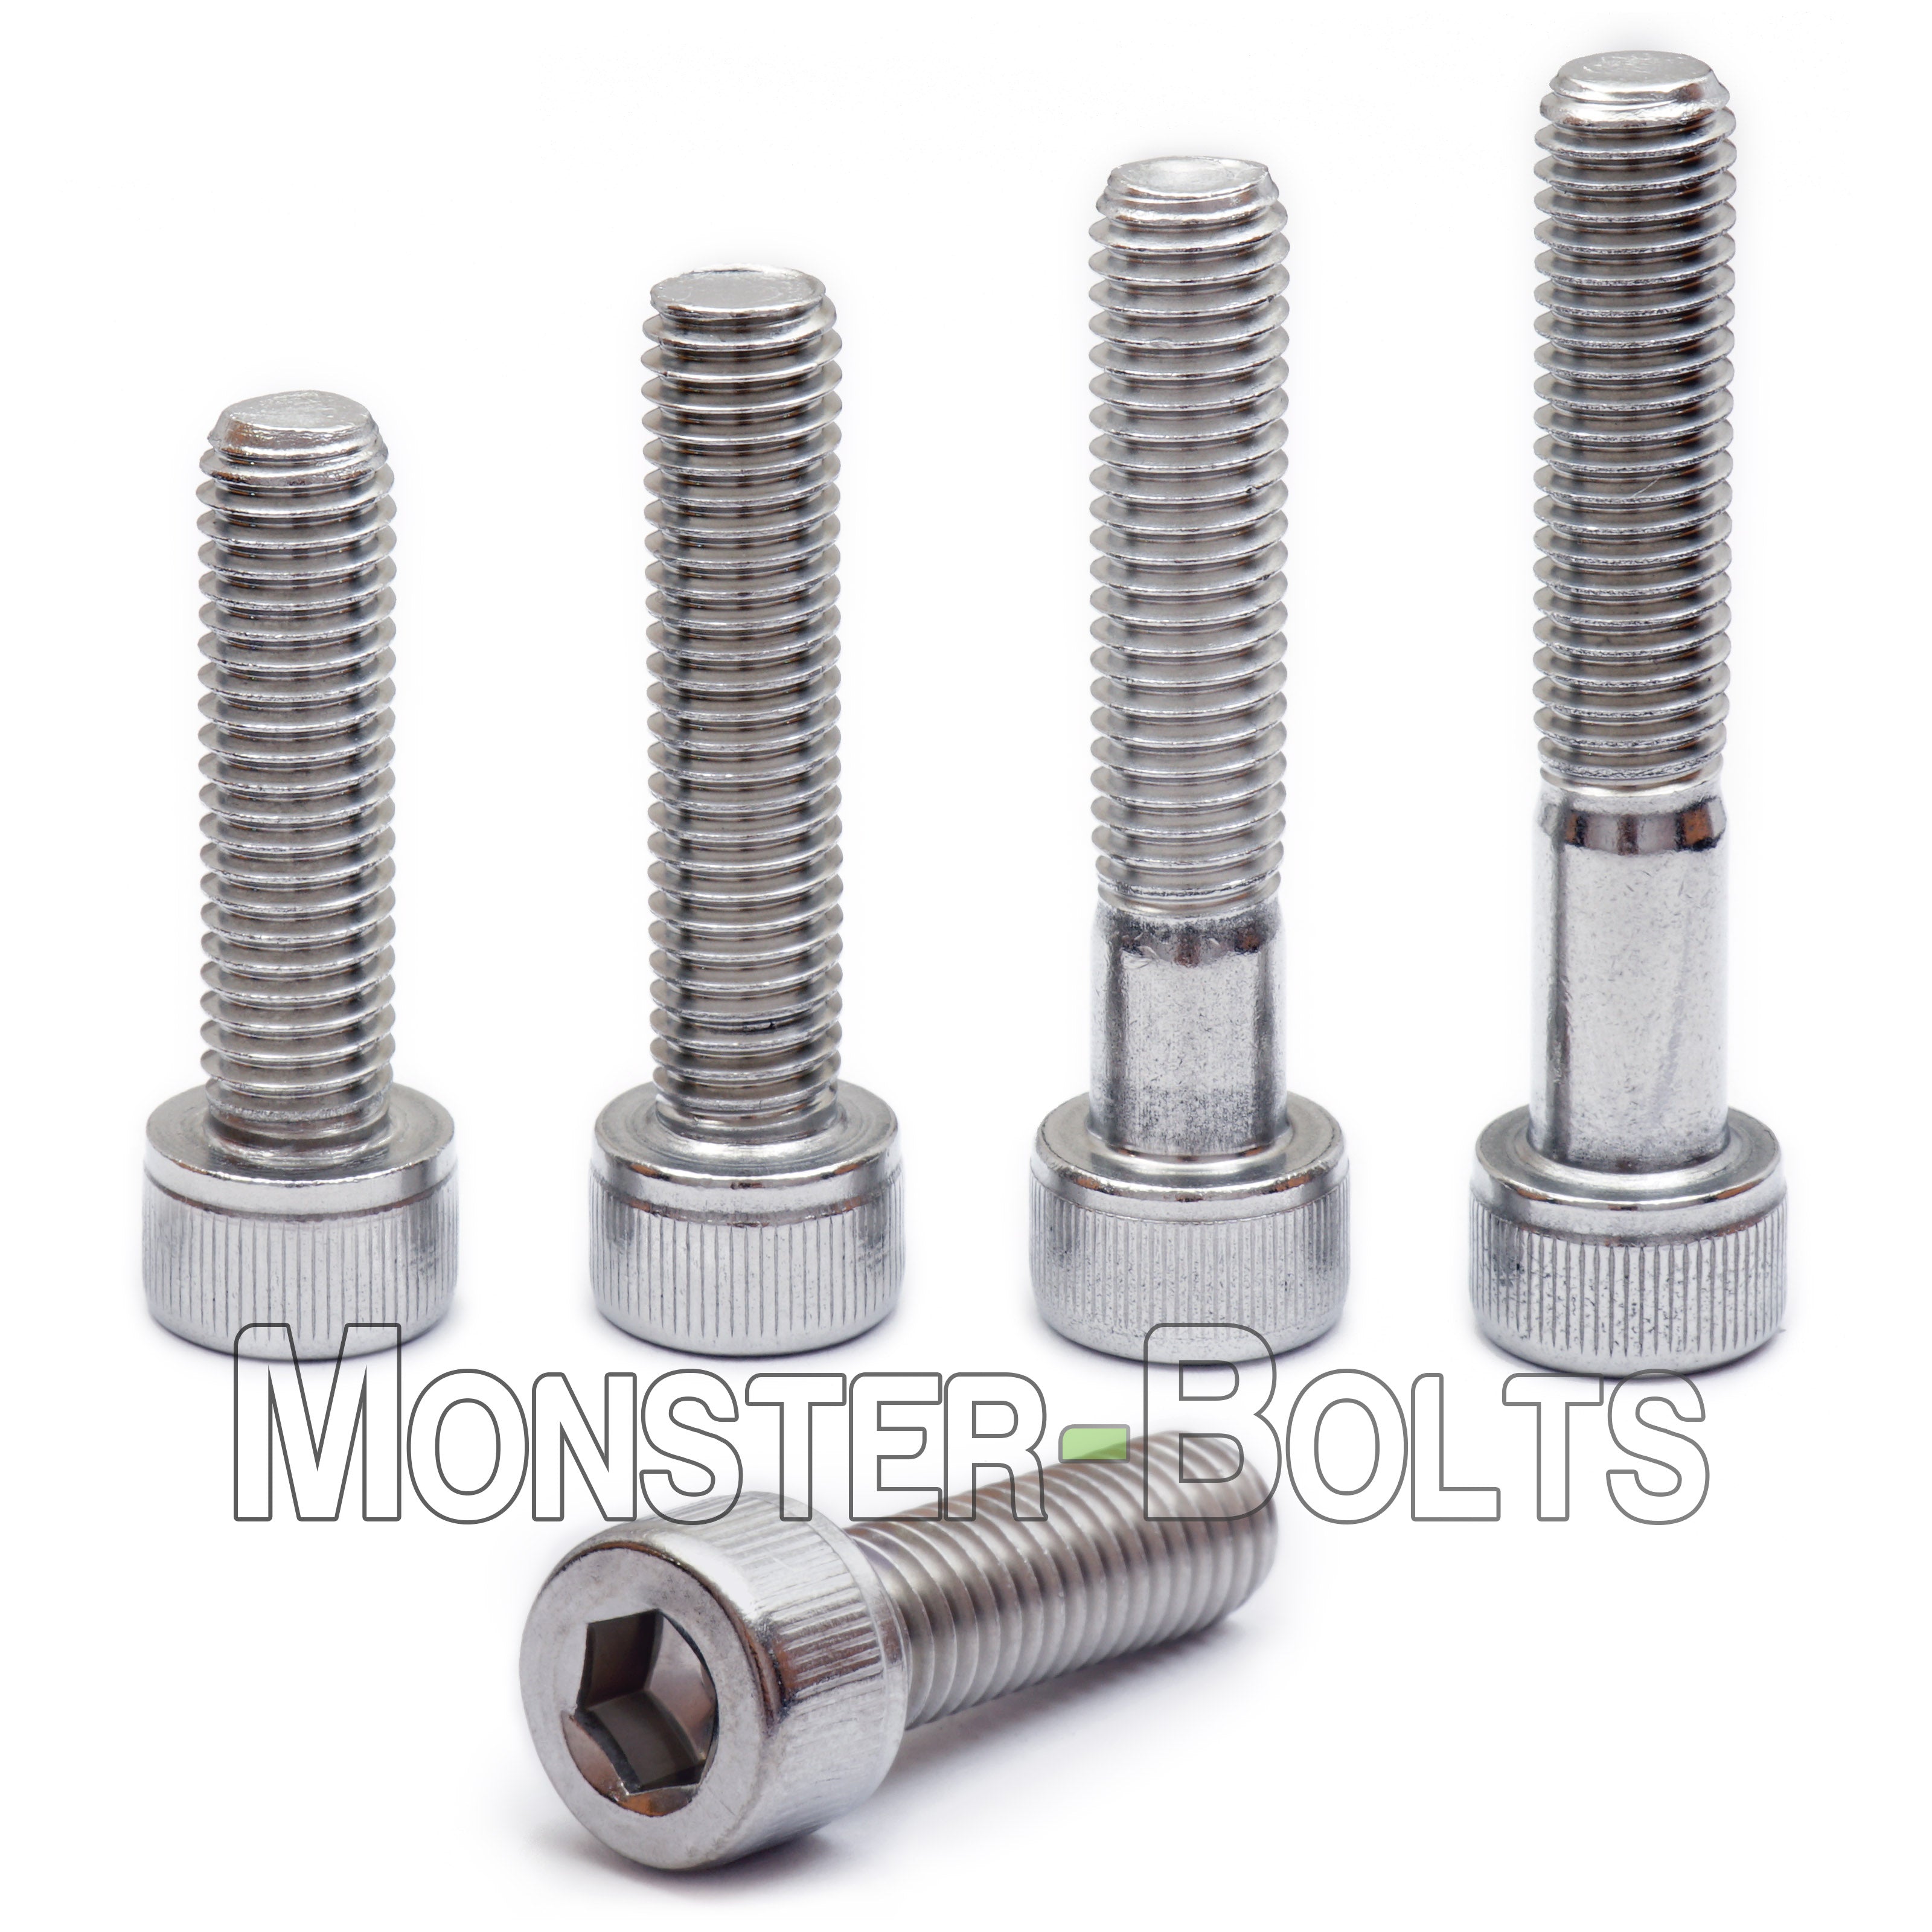 AISI 304 Stainless Steel UNF Fine Thread Cup Point #2-64 X 1/8 Set Screws Hex Socket Drive 18-8 10 pcs 